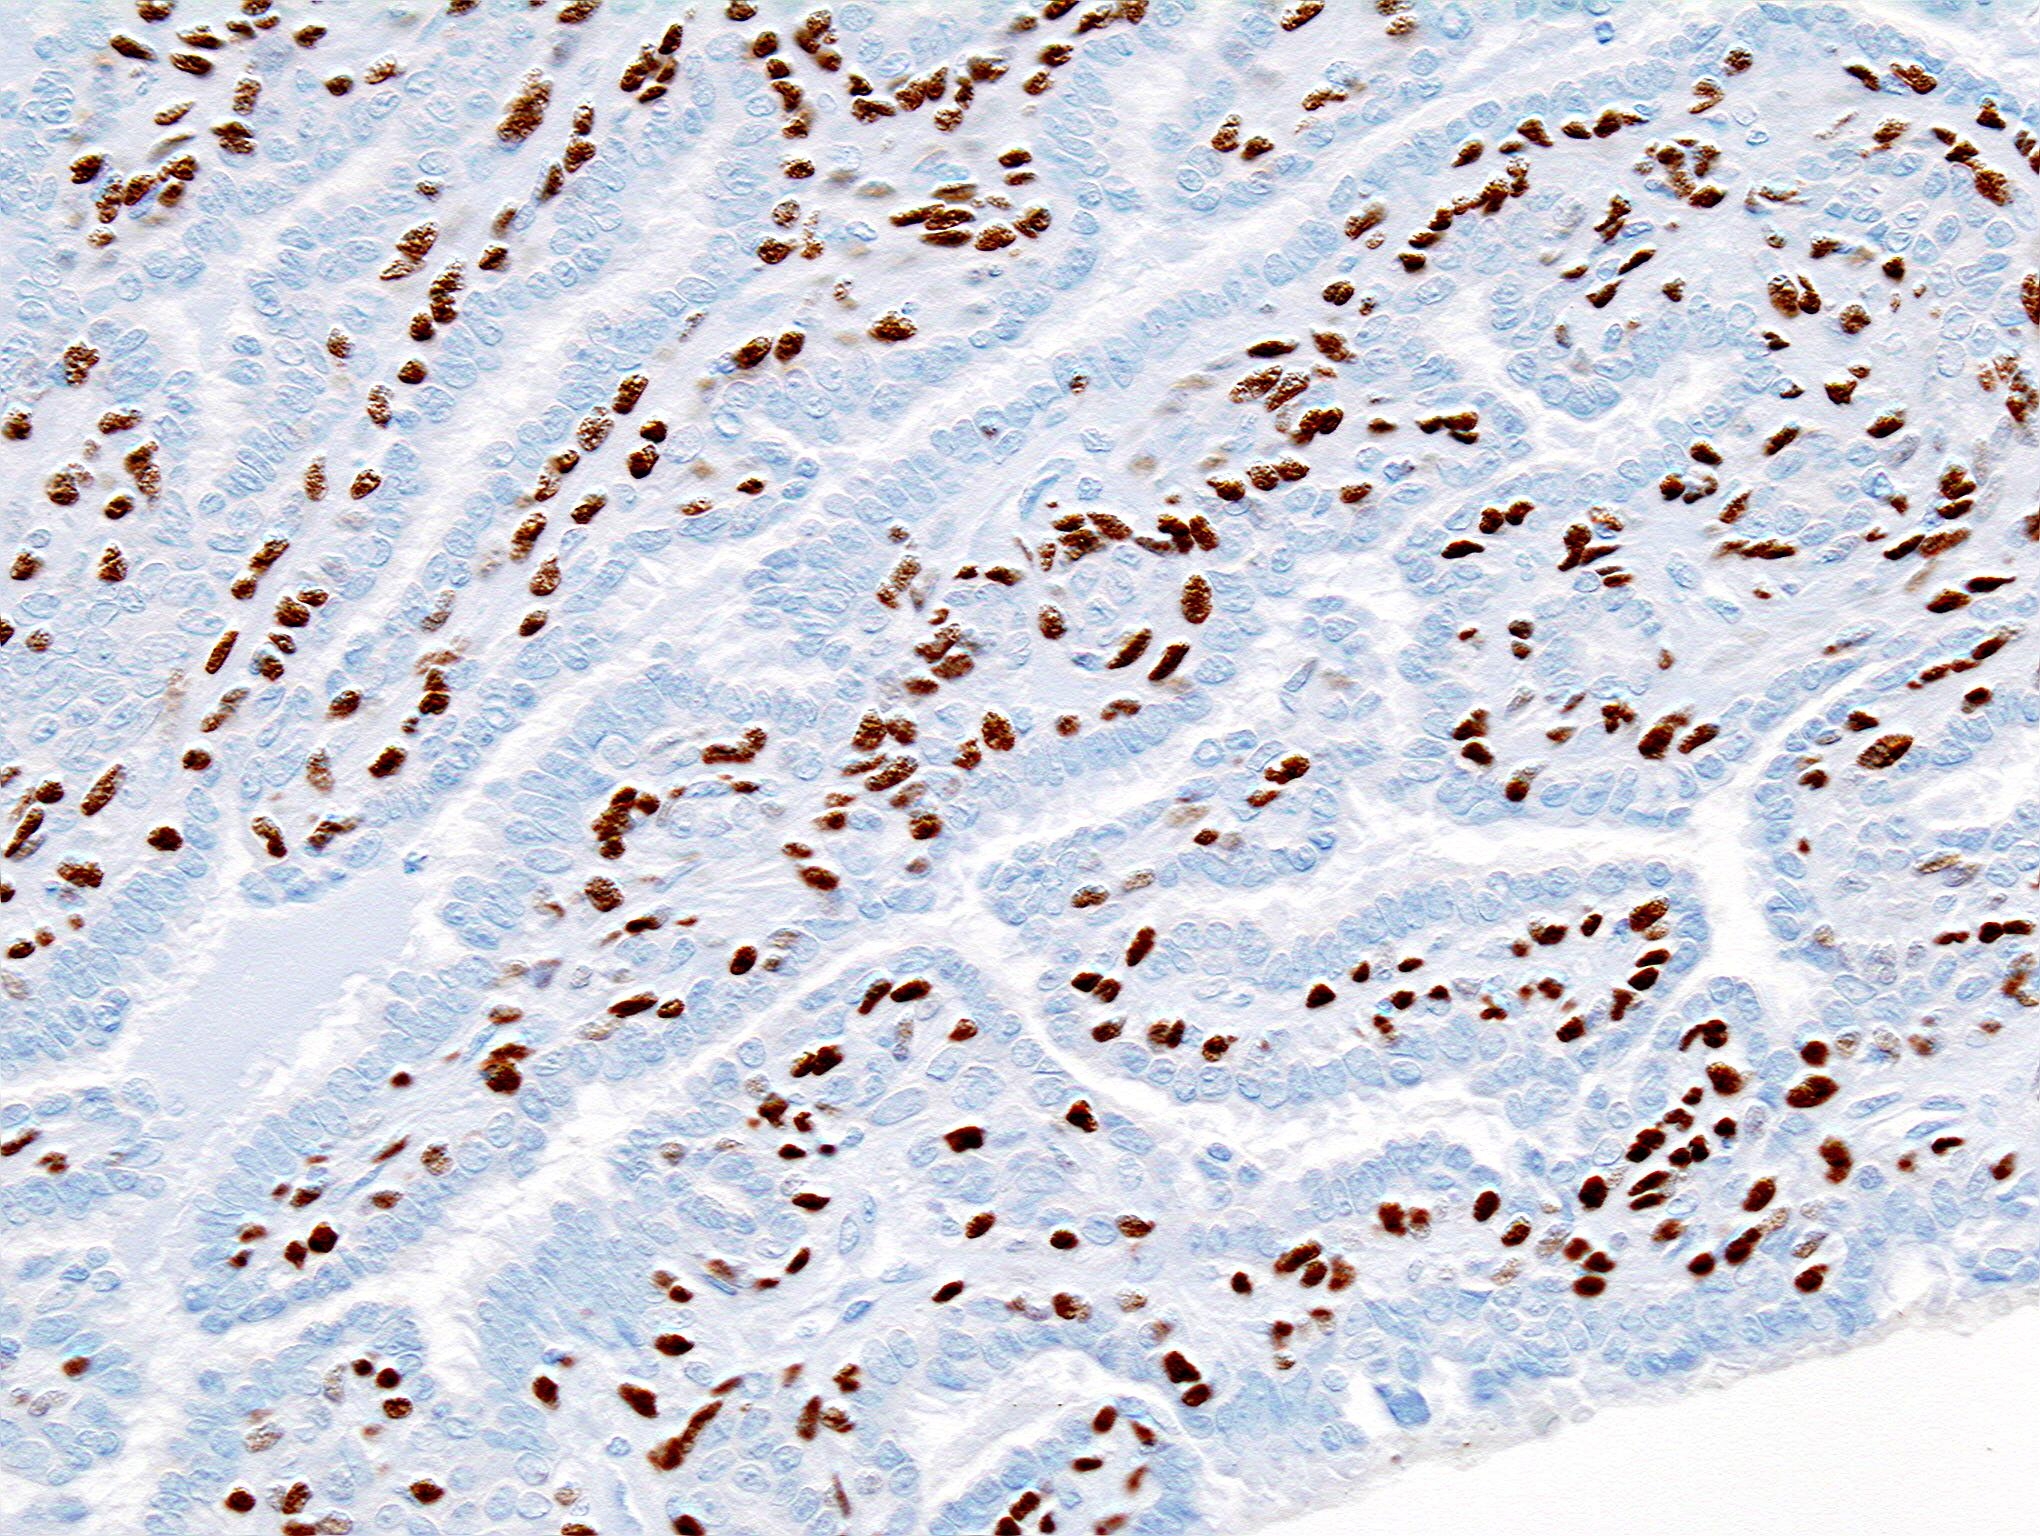 Histopathology of intraductal papilloma of the breast by excisional biopsy. Immunostaining for p63 protein.